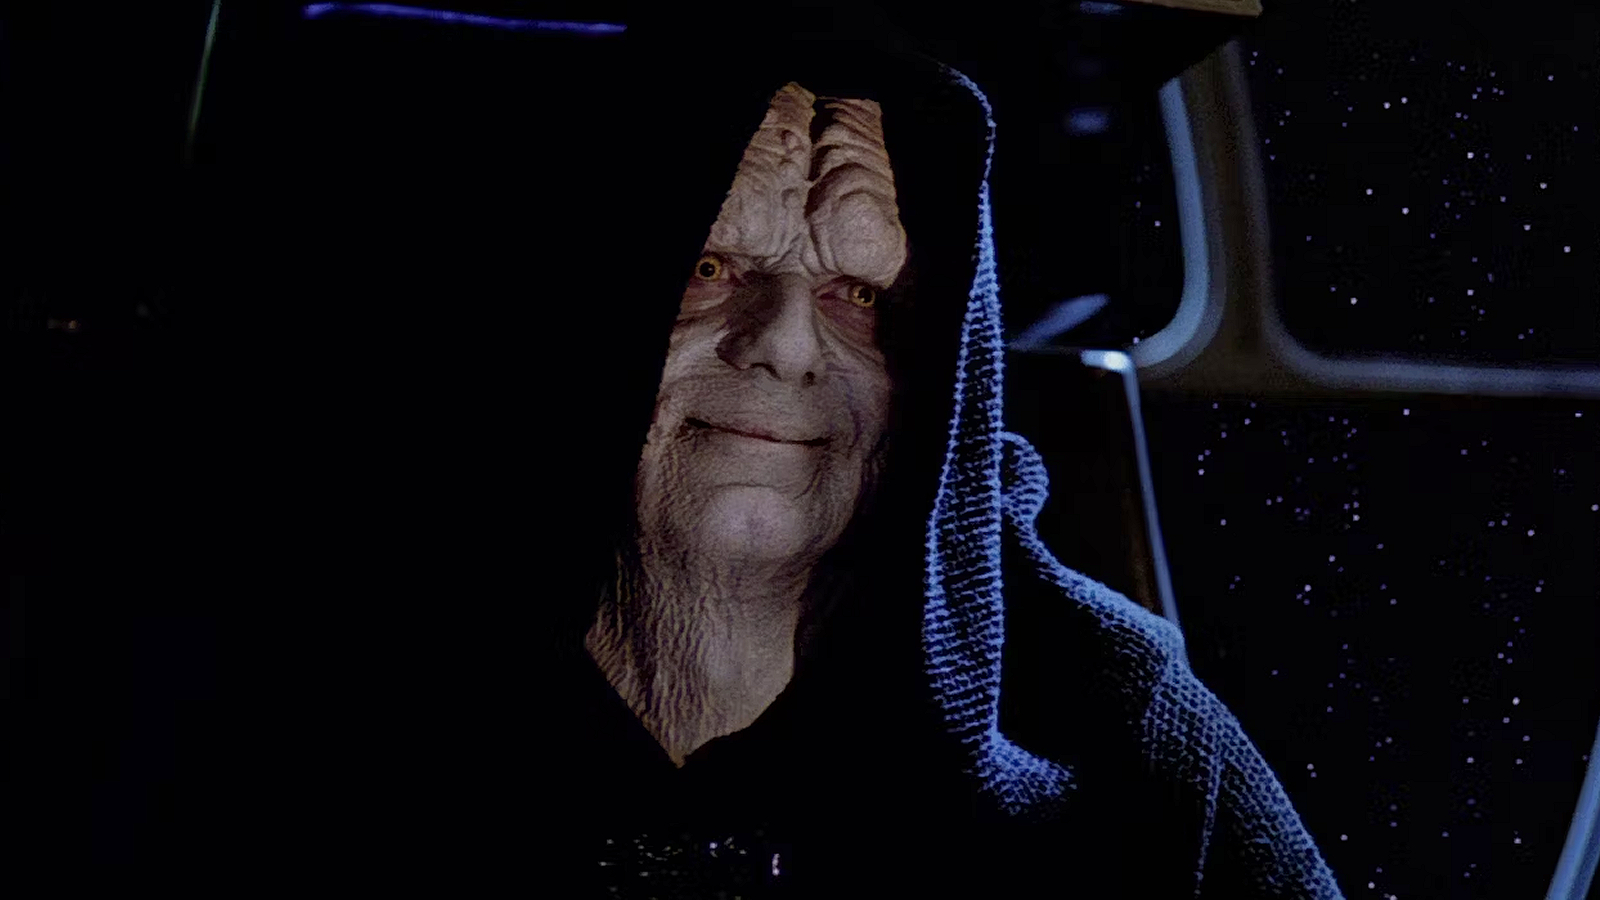 A close-up of Emperor Palpatine smiling in Star Wars: Return of the Jedi